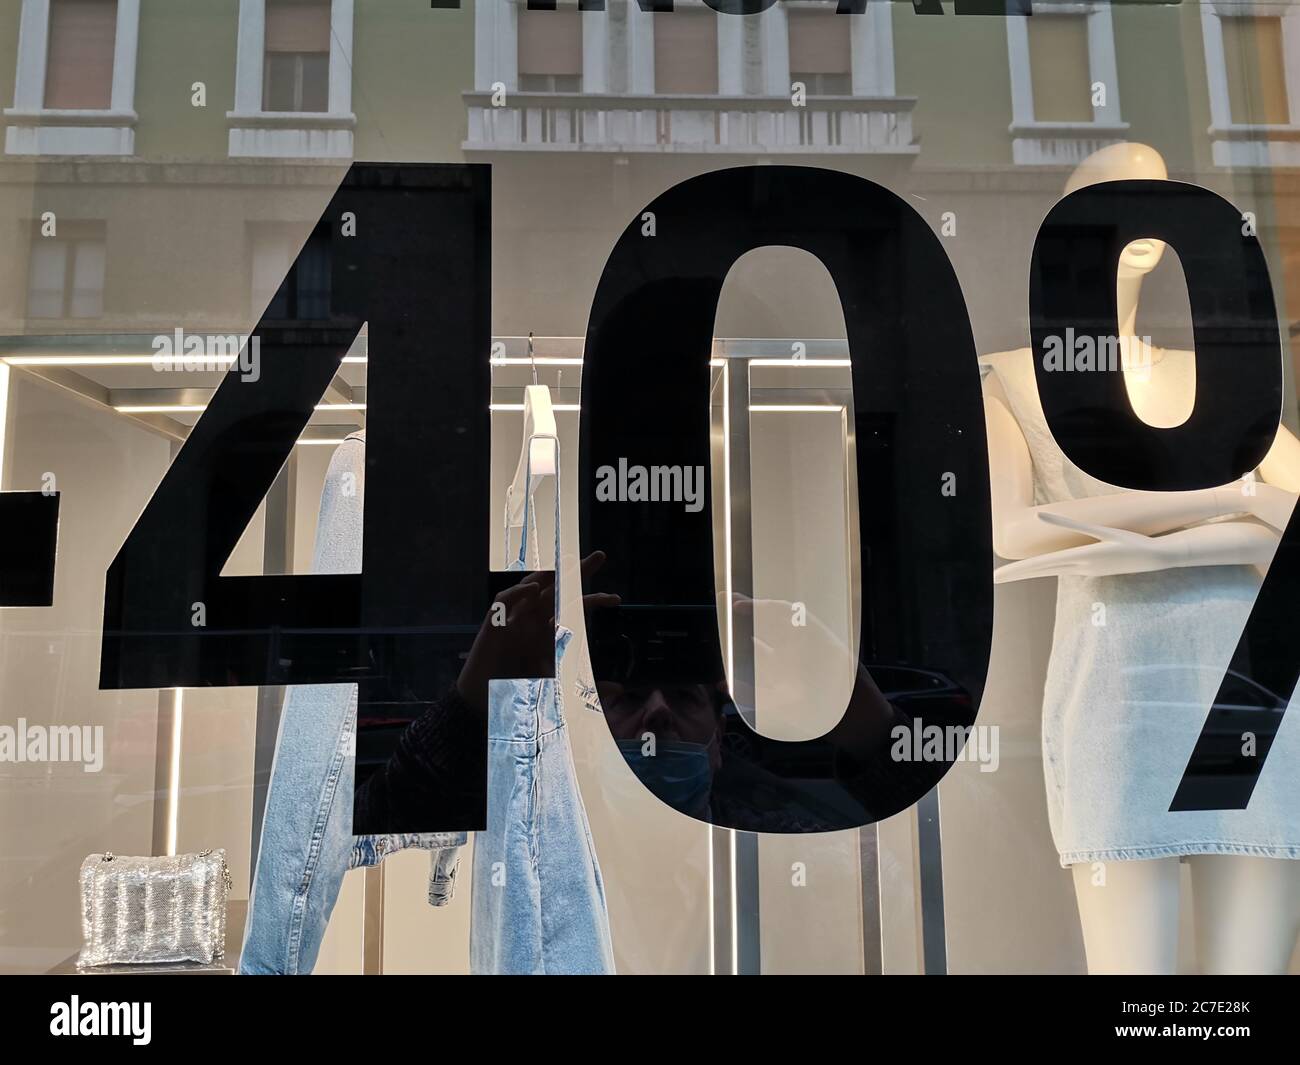 40% discounted sale at Zara Italy July 2020 Stock Photo - Alamy